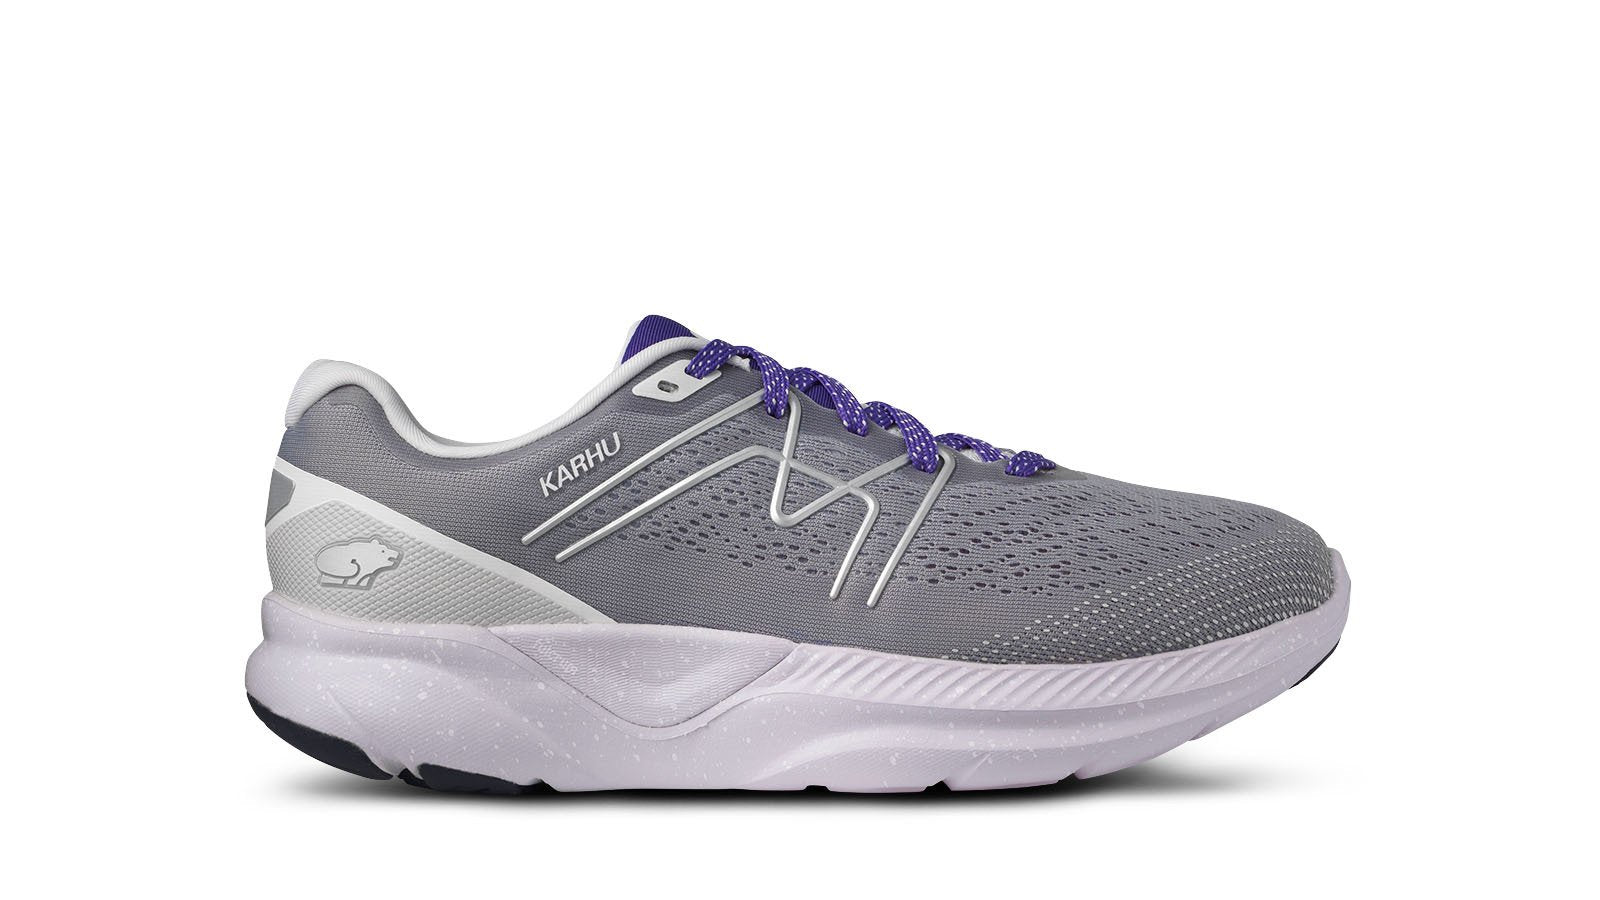 WOMEN'S FUSION 3.5 - ULTIMATE GRAY / ORCHID HUSH